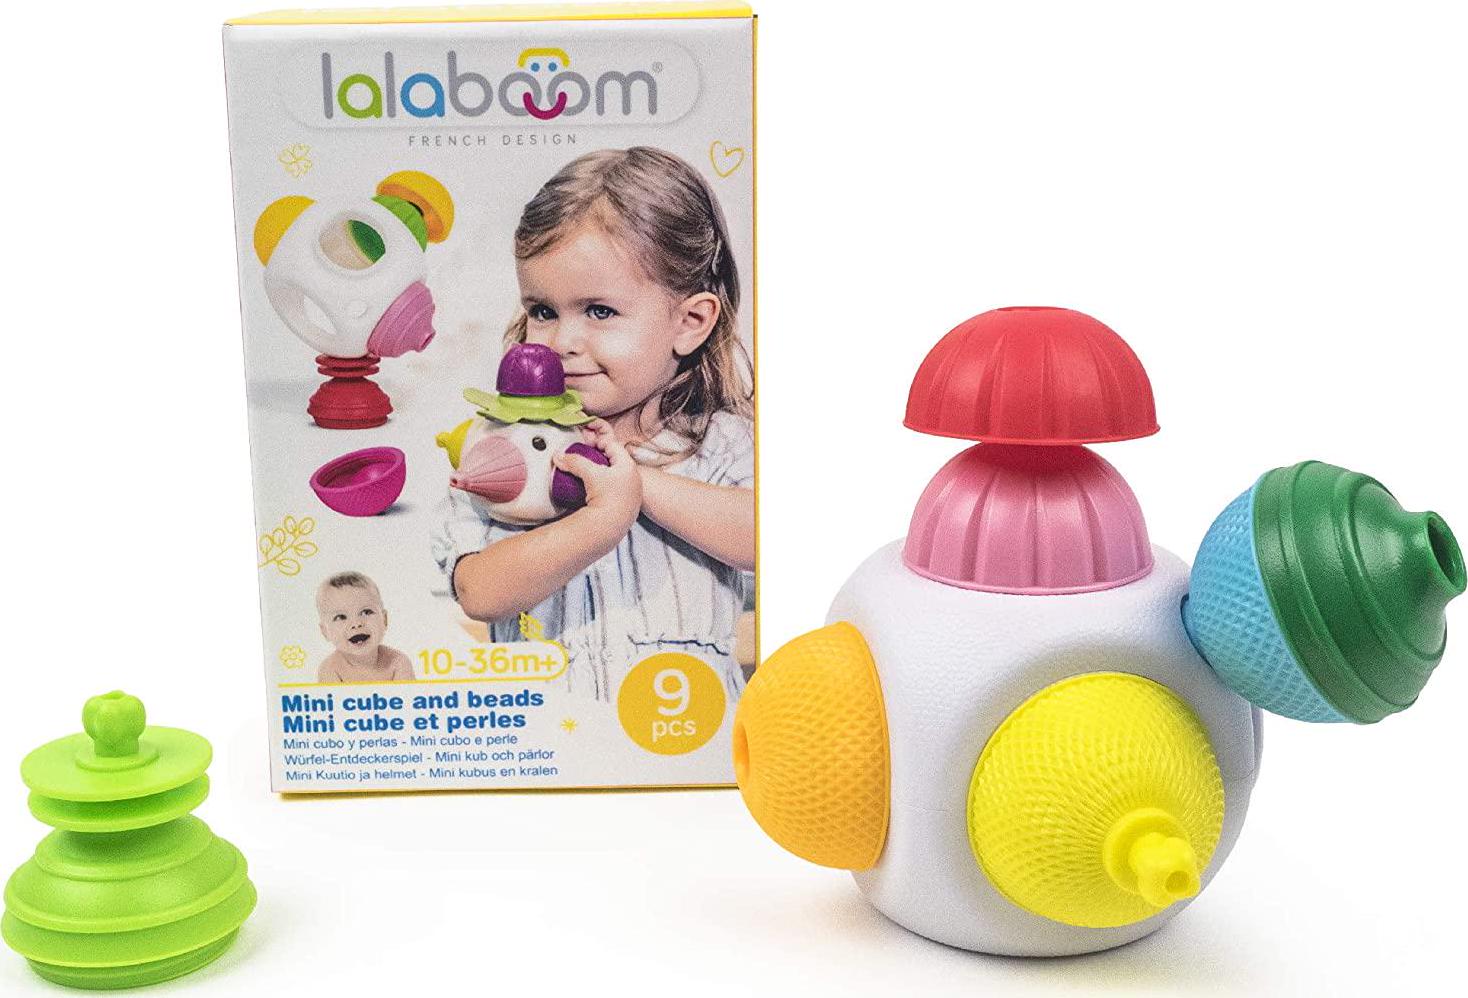 Lalaboom, Lalaboom - Cube and Beads to Assemble - Preschool Toy - Montessori Education Shapes and Colors and Construction Game and Learning Toy for Children from 10 Months to 4 Years Old - BL650, 9 Pieces